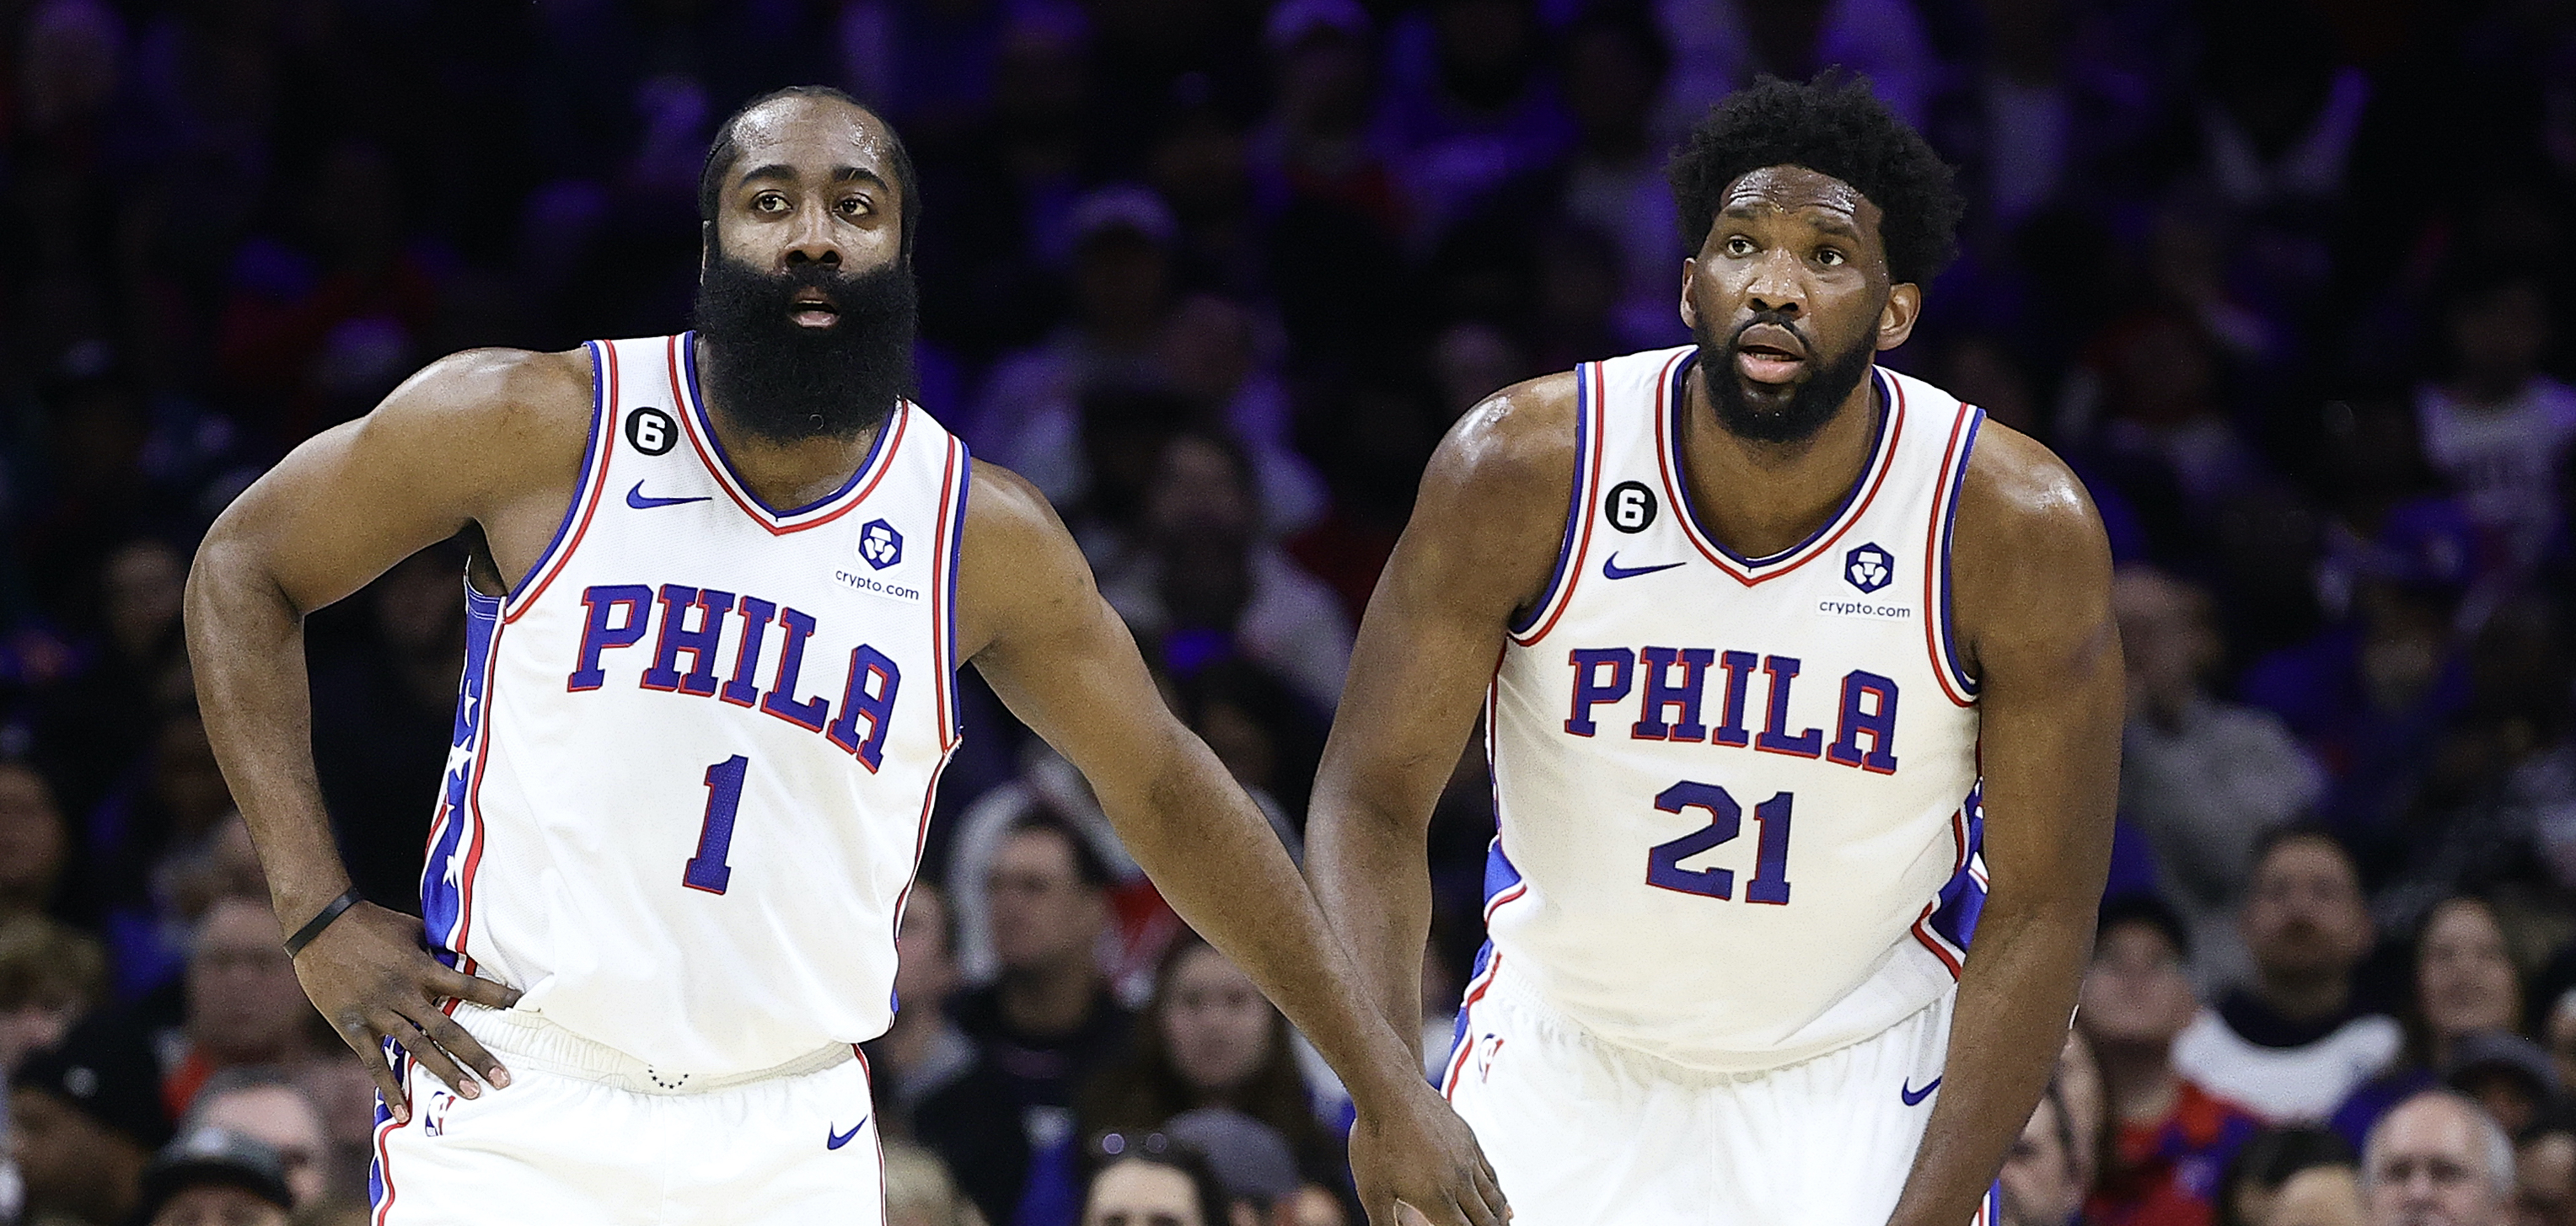 NBA Betting Guide: Lines, Trends & Picks For Friday, Dec. 23